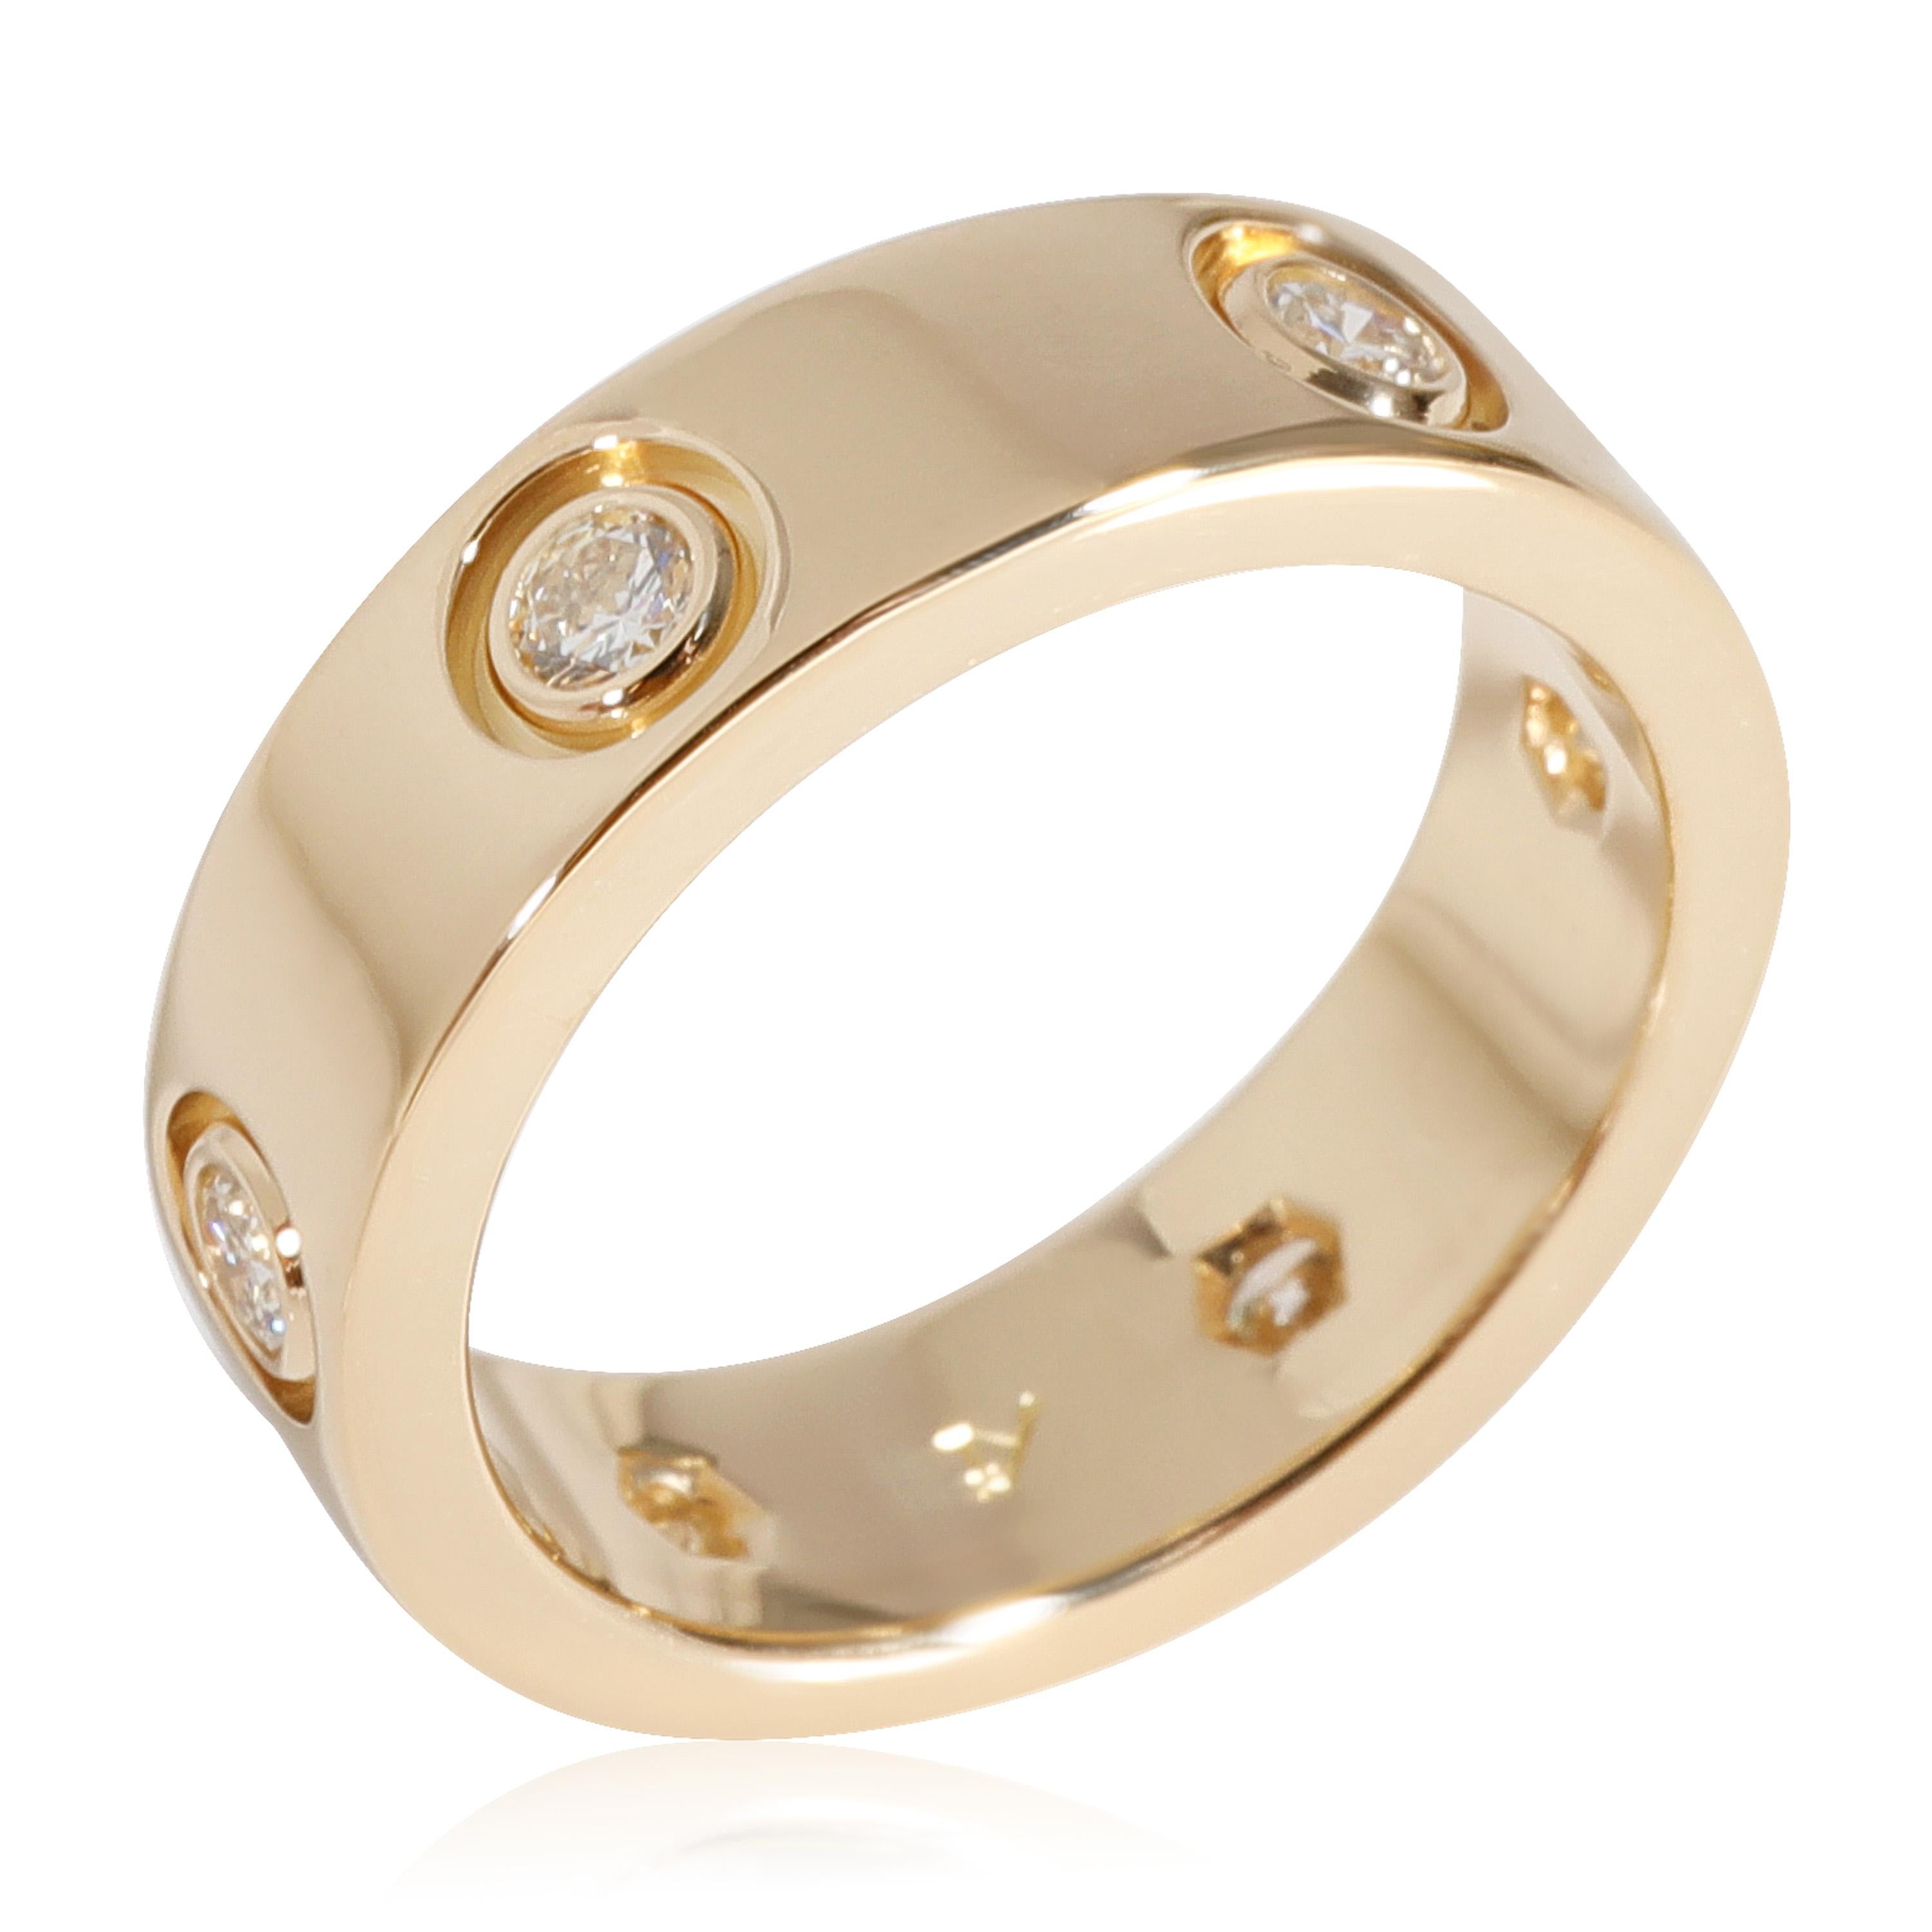 Cartier Love Diamond Ring in 18k Yellow Gold 0.46 CTW

PRIMARY DETAILS
SKU: 123193
Listing Title: Cartier Love Diamond Ring in 18k Yellow Gold 0.46 CTW
Condition Description: Retails for 6000 USD. In excellent condition and recently polished. Ring